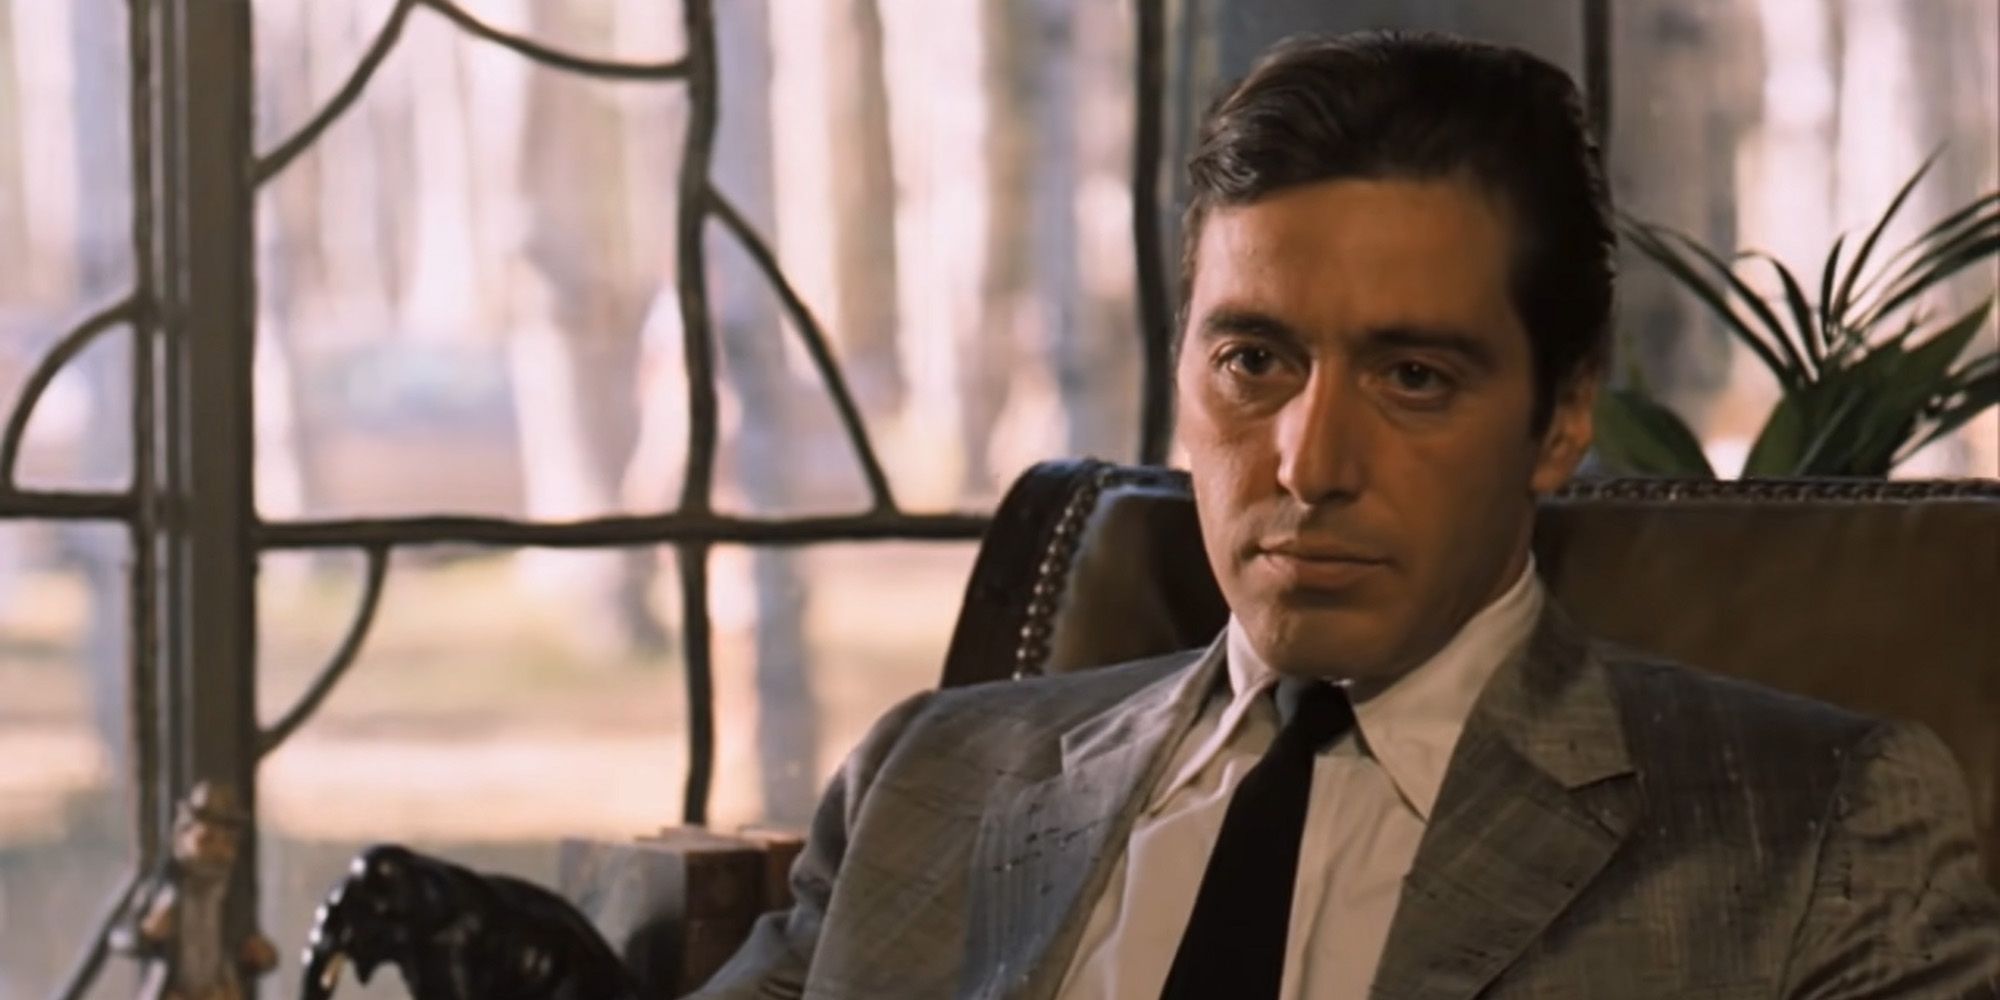 Michael Corleone in The Godfather Part II